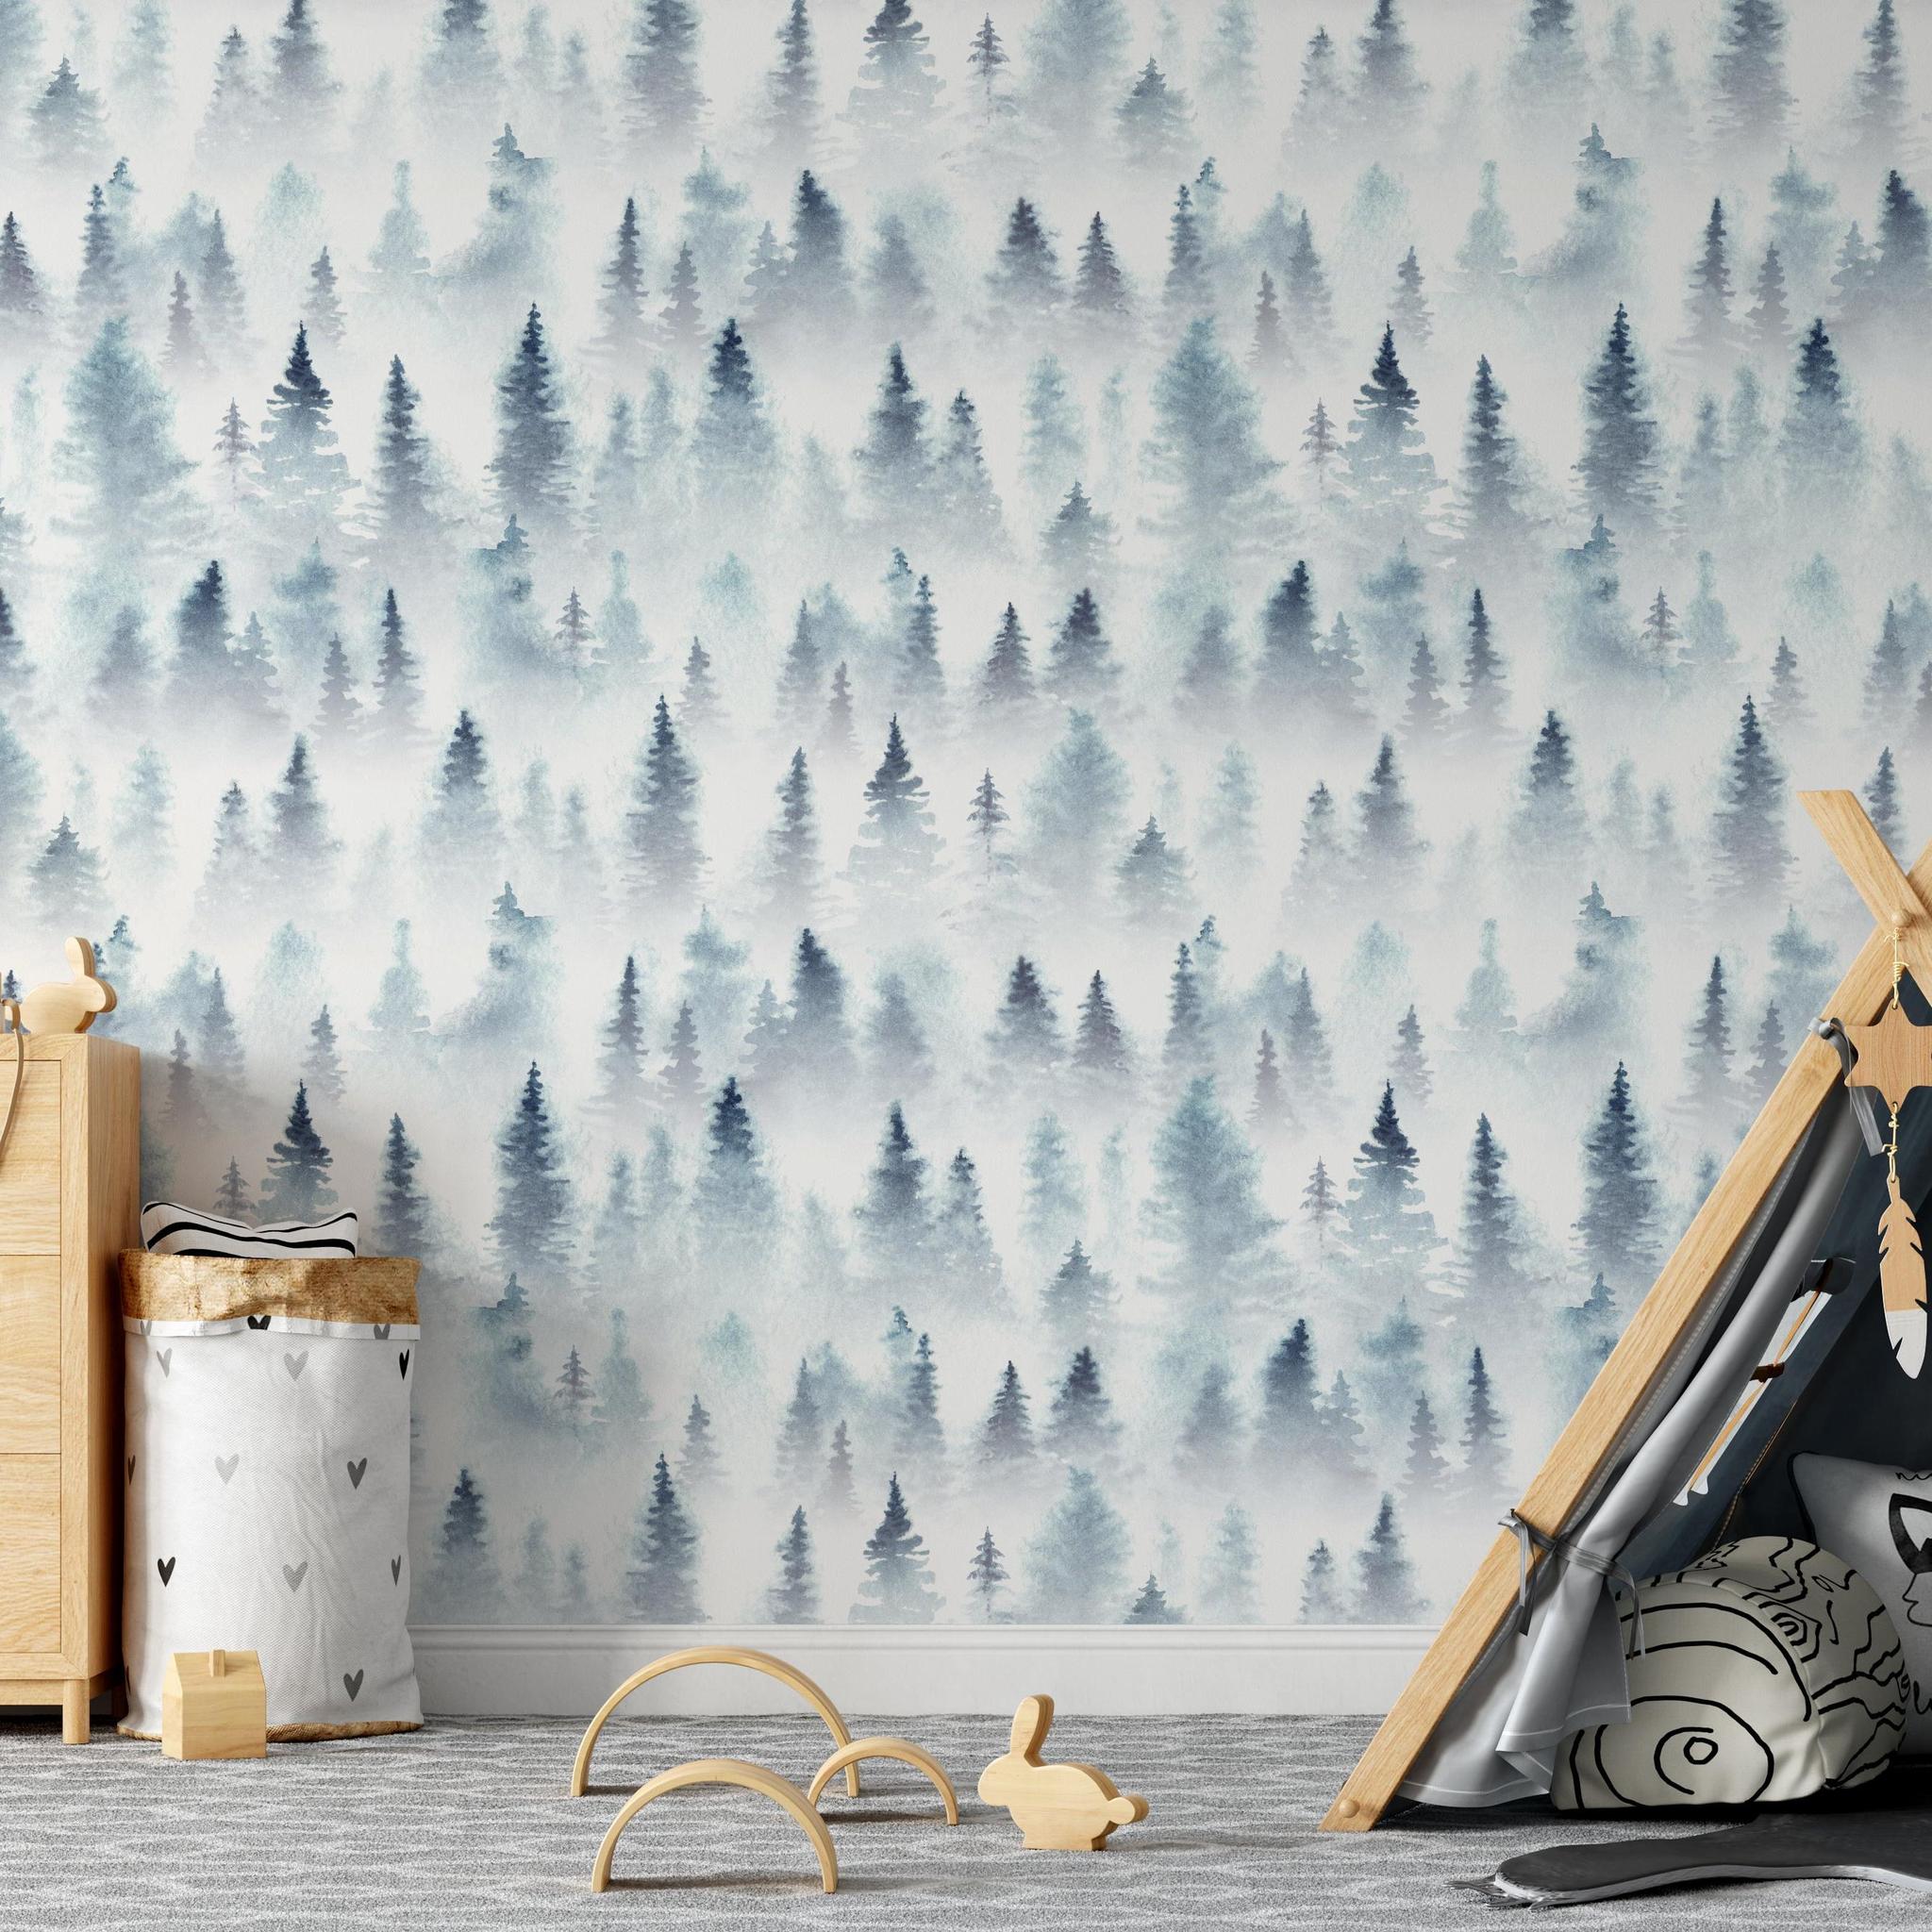 Wanderer Wallpaper by Wall Blush with a forest design in a stylish kids' room, highlighting cozy decor accents.
